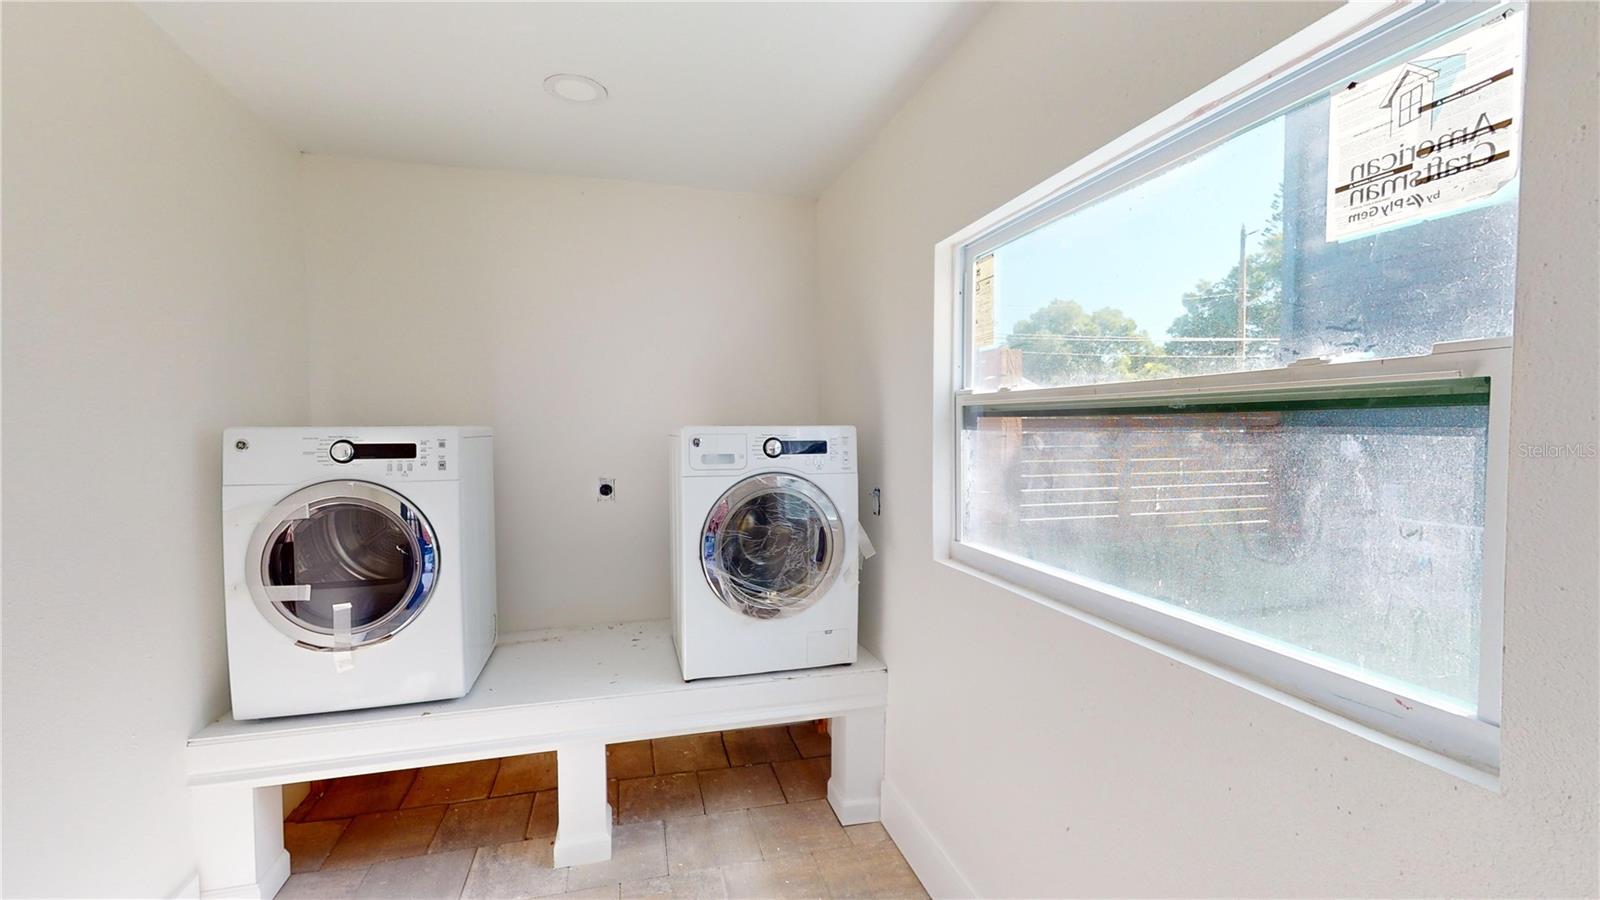 Secondary home private utility/laundry room